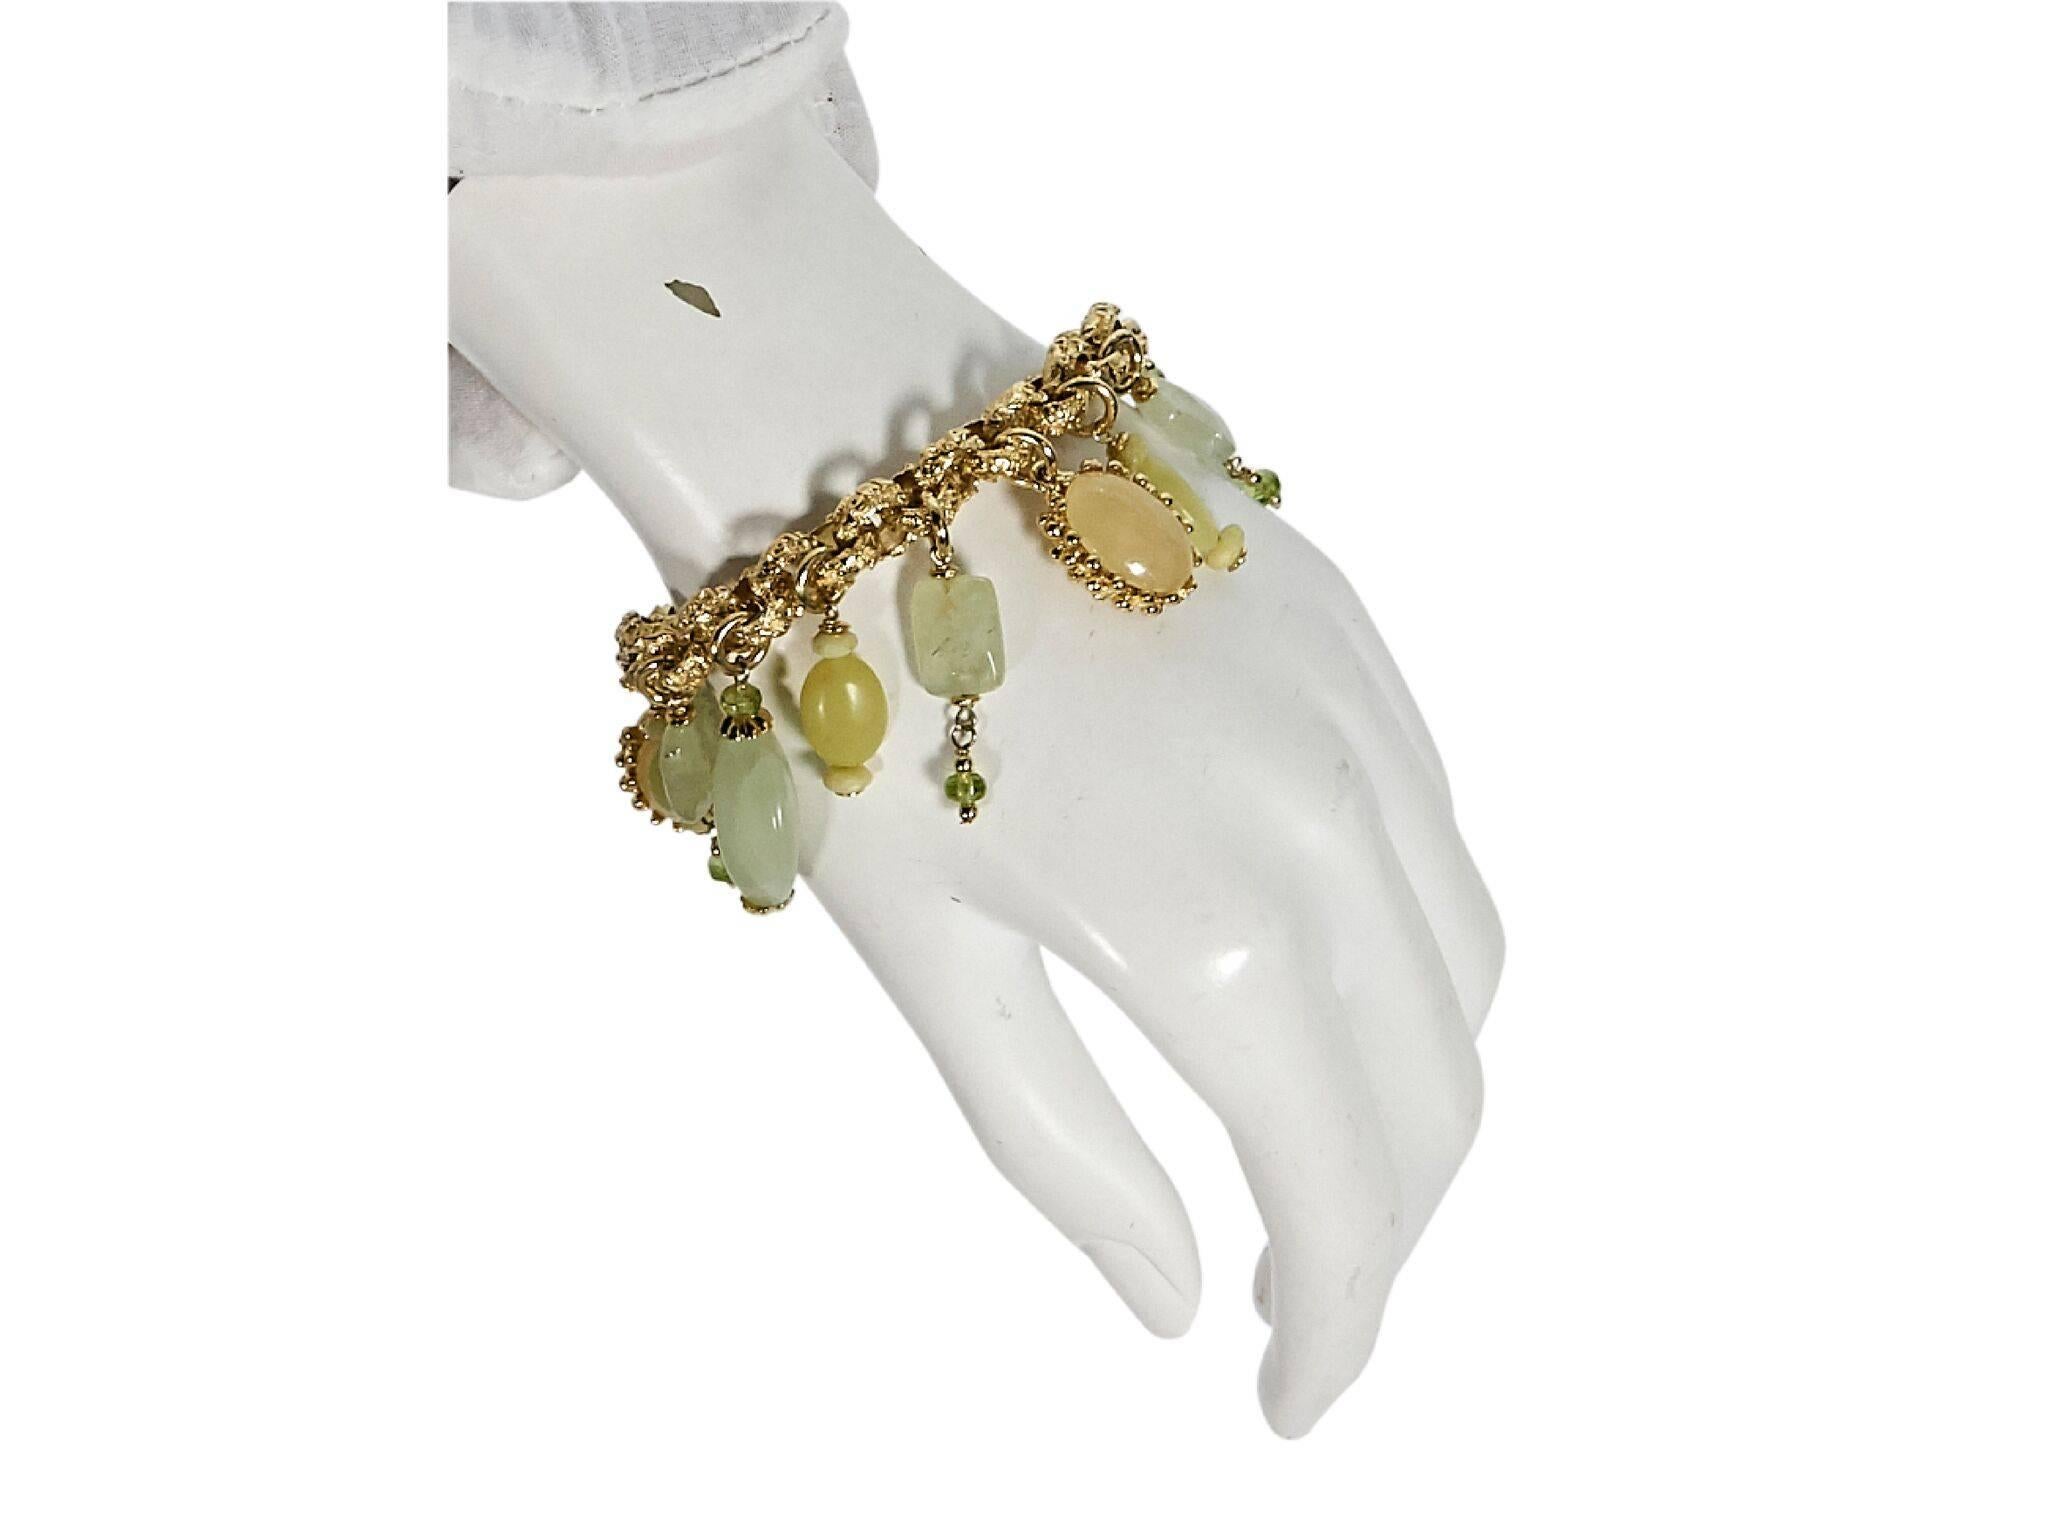 Product details:  Goldtone beaded bracelet by St. John.  
Condition: Pre-owned. New with tags. 
Est. Retail $335